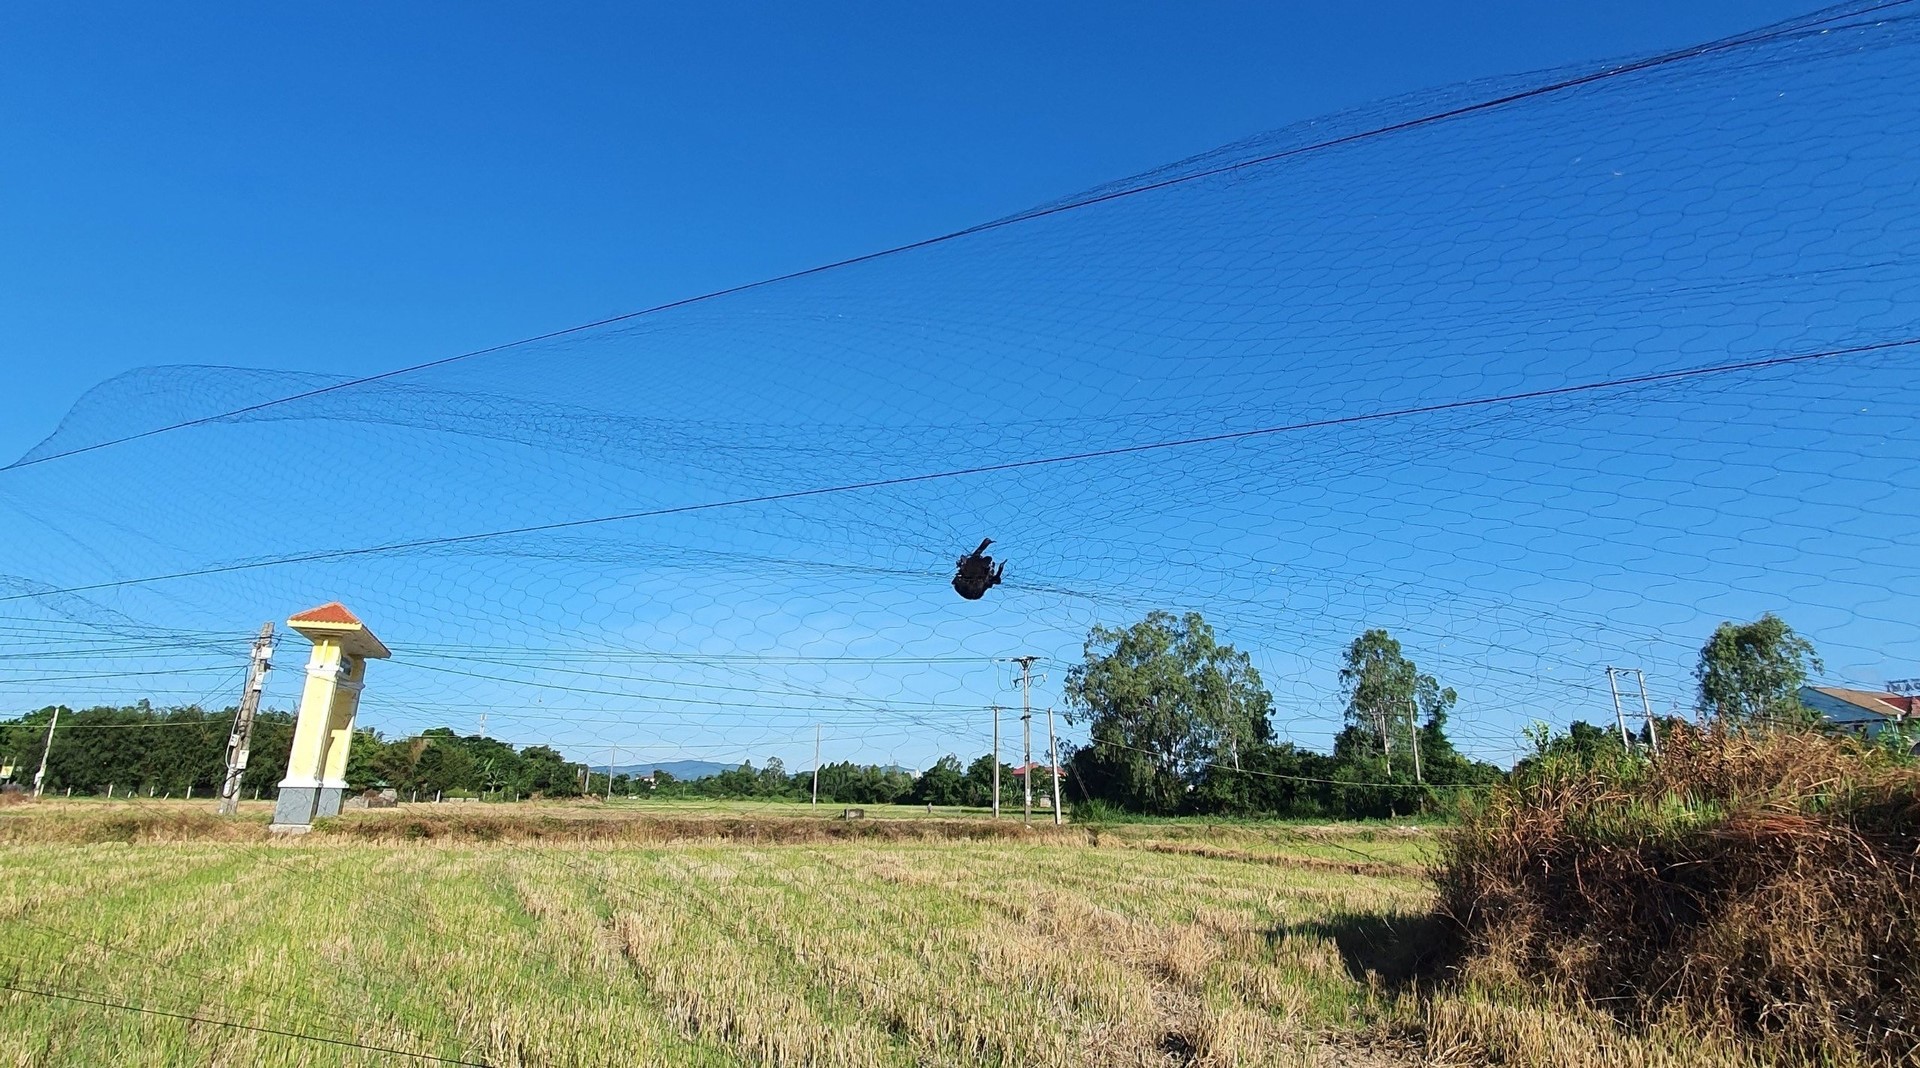 In many places, people use invisible nets to trap swiftlets and wild birds. Photo: KS.